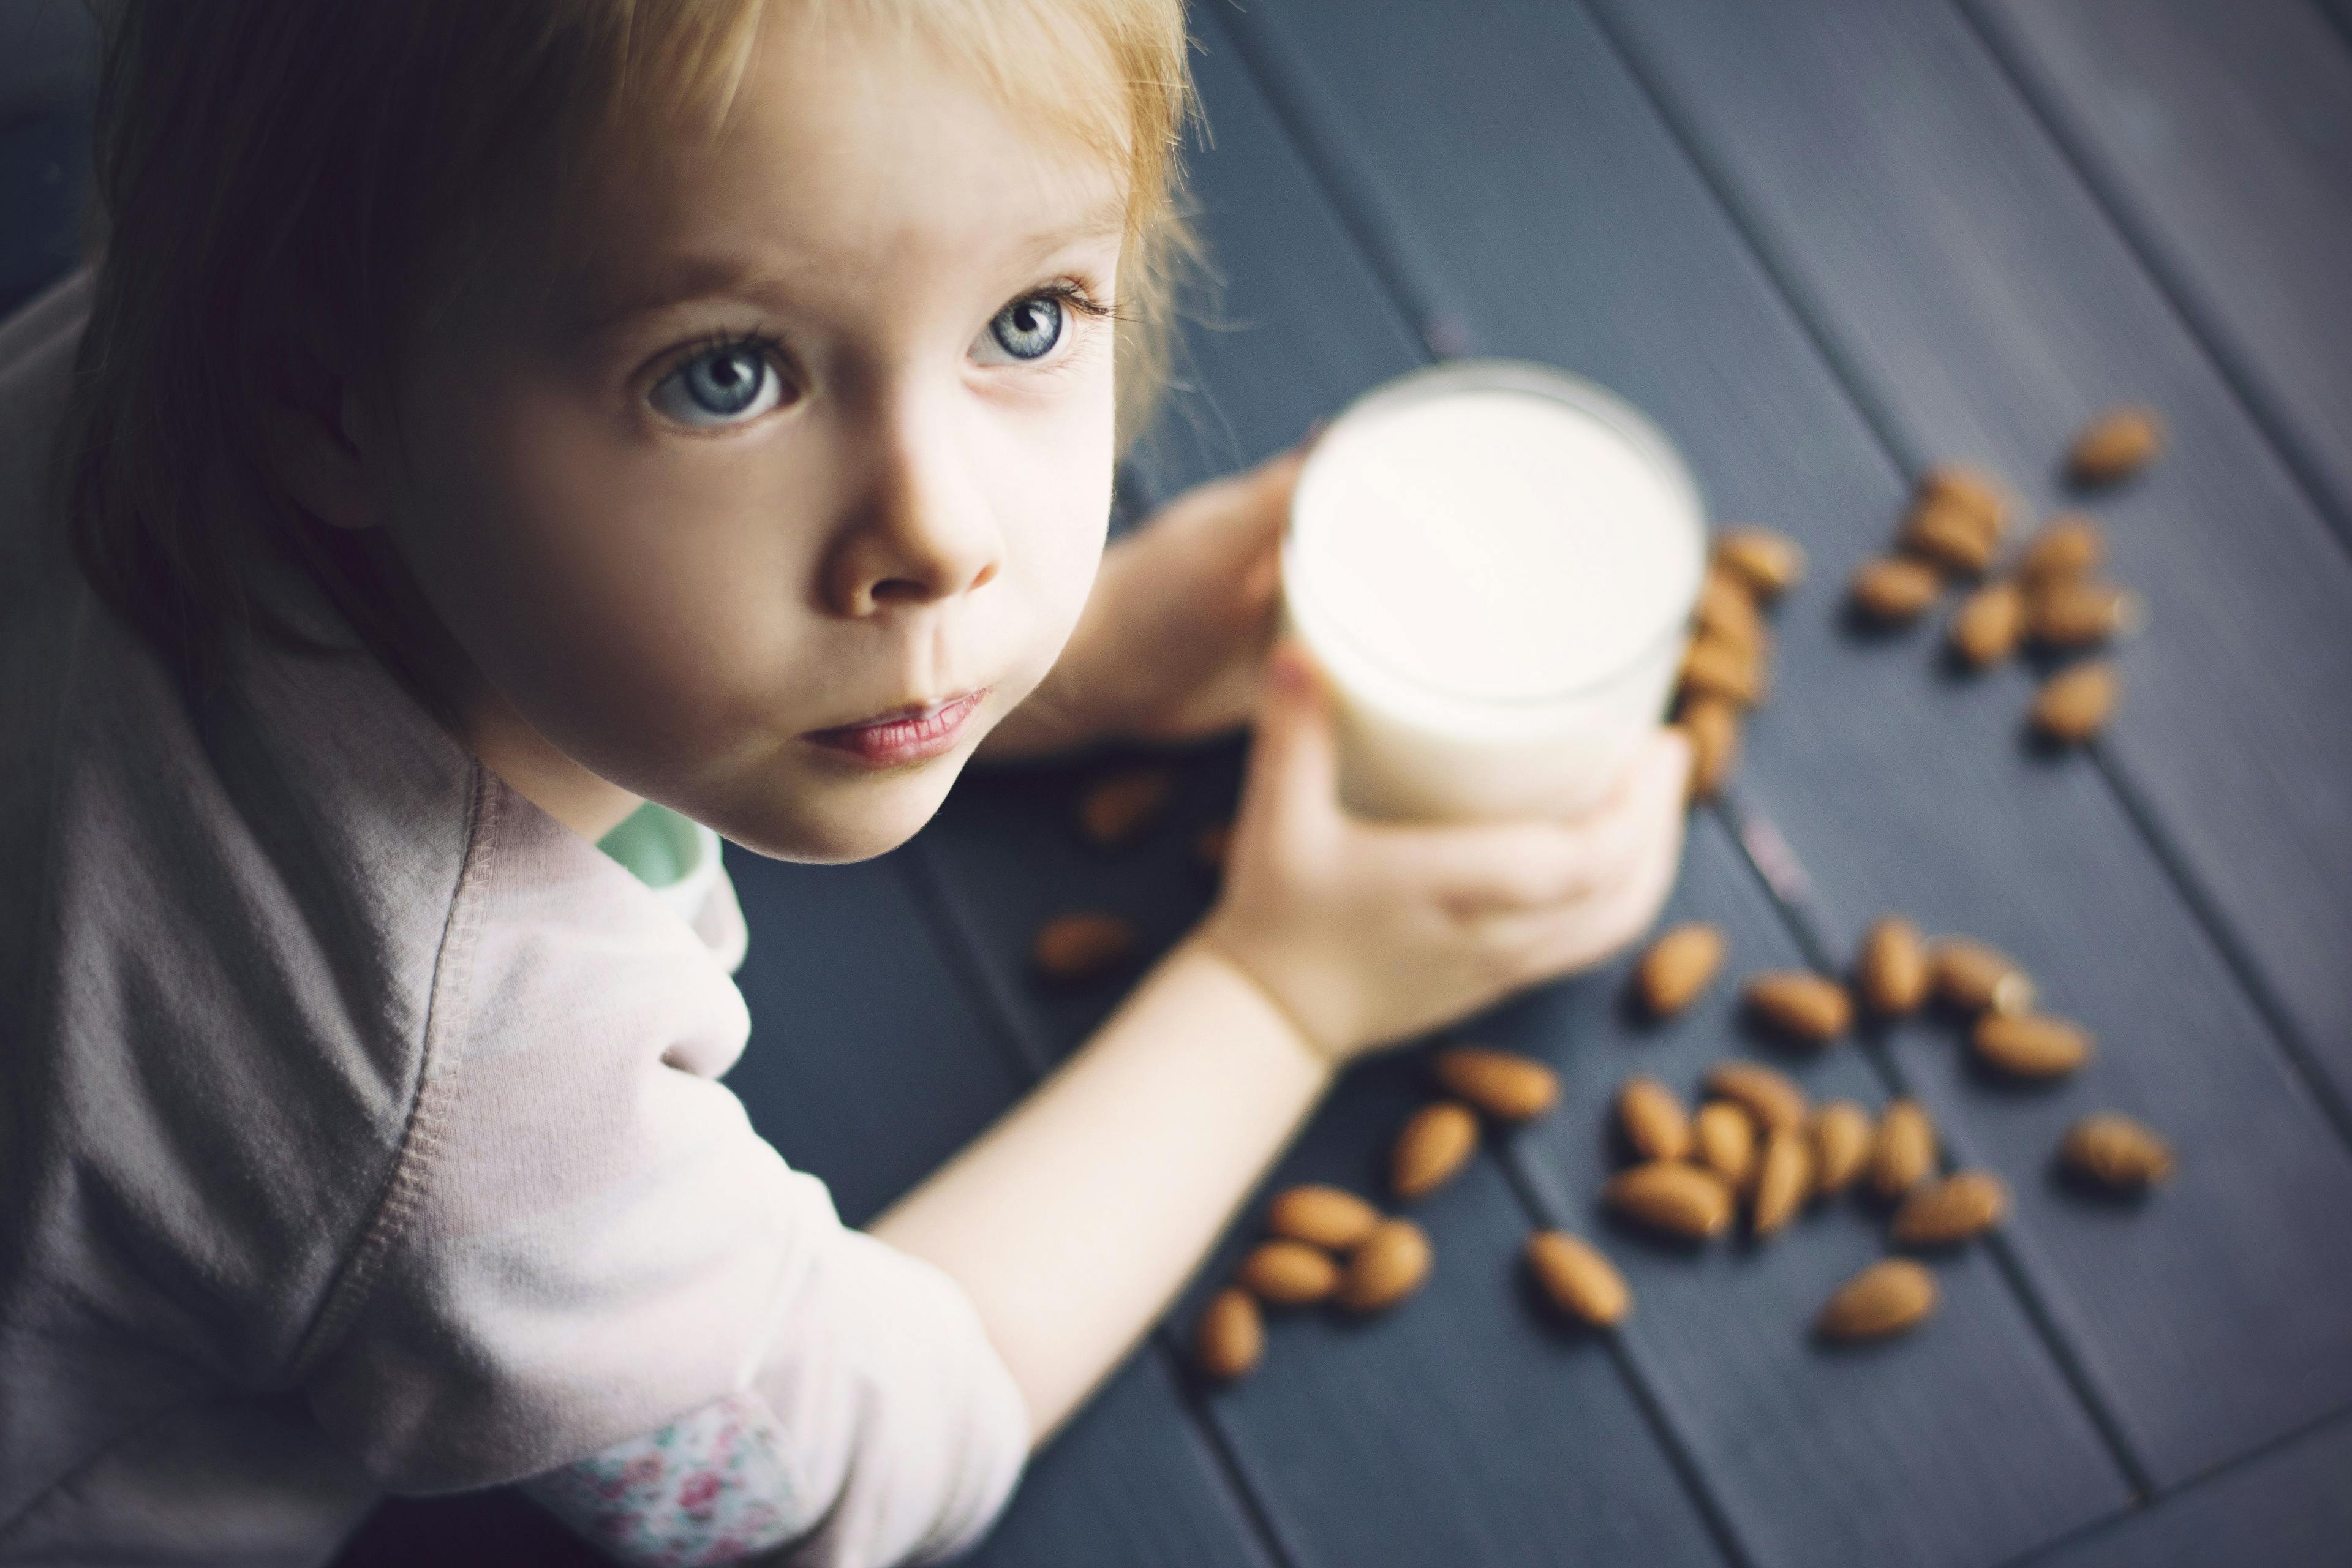 Oral immunotherapy shown to be effective in desensitization for egg, milk, peanut allergy | Image Credit: © Yulia - © Yulia - stock.adobe.com.